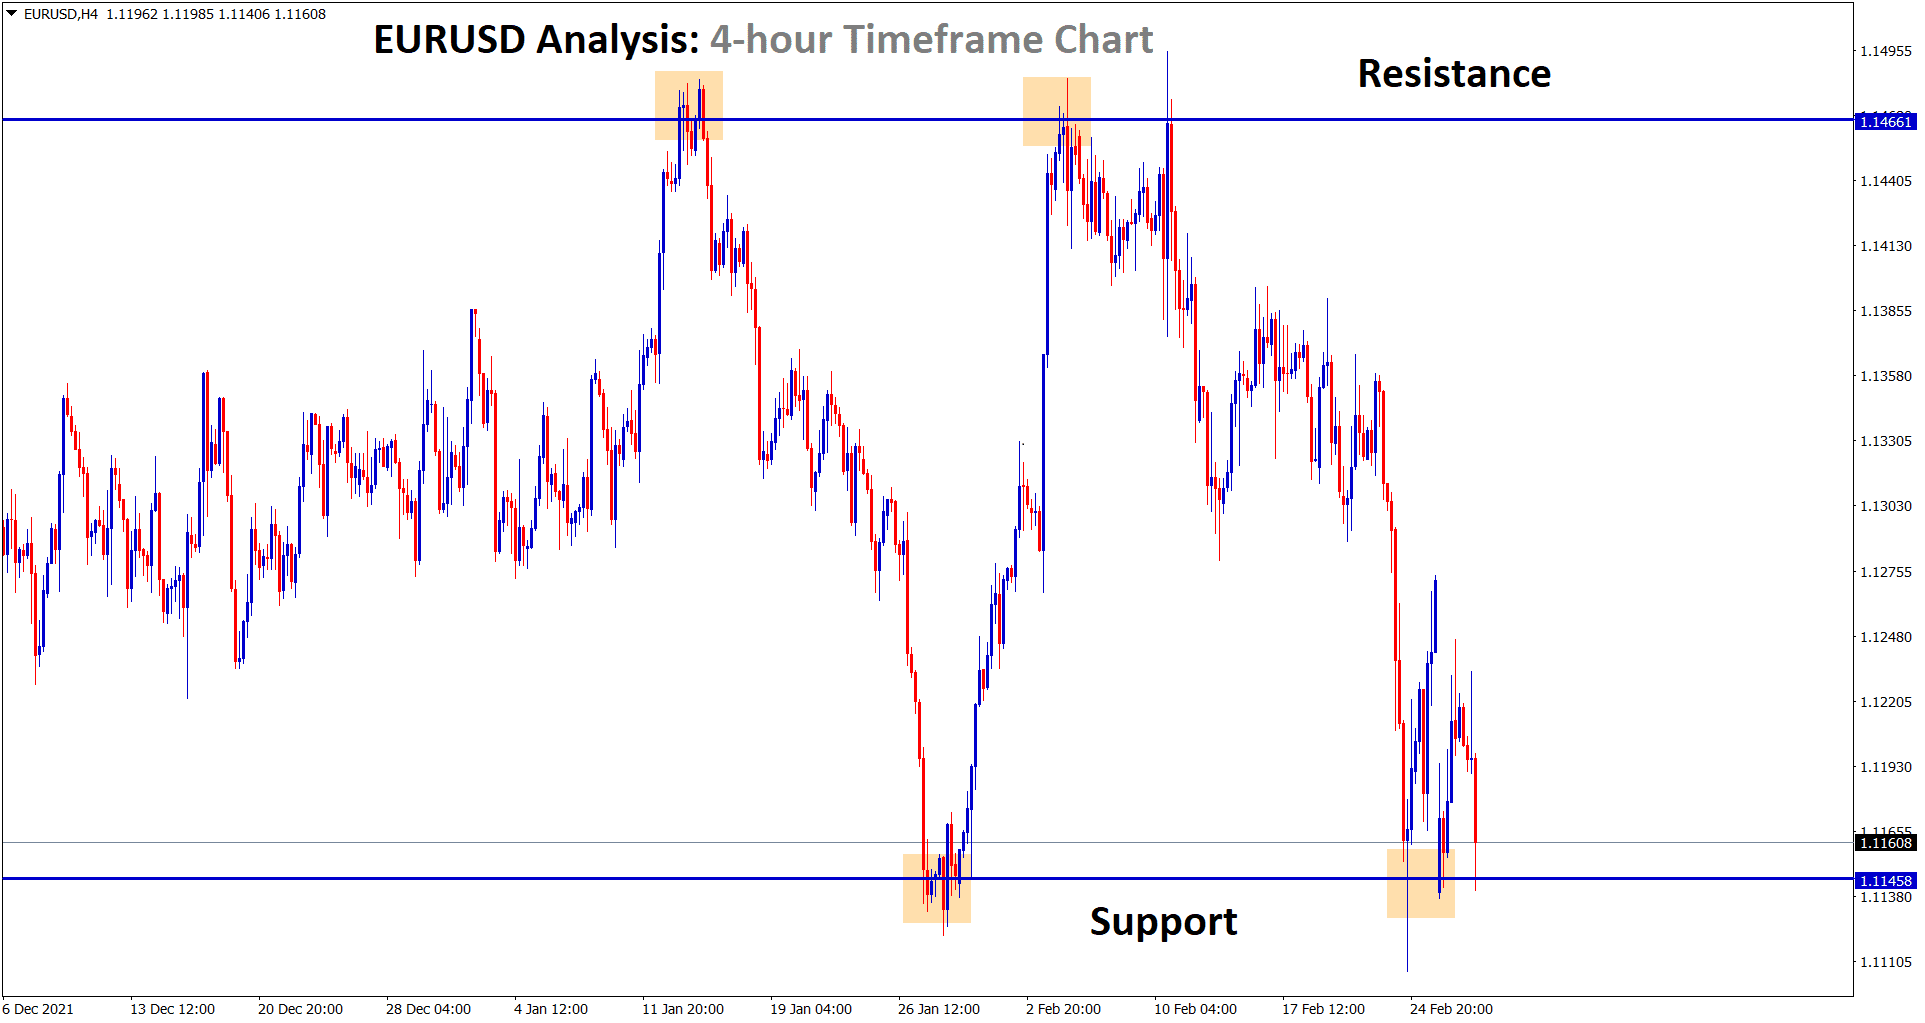 EURUSD is retesting the support area again in the 4 hour timeframe